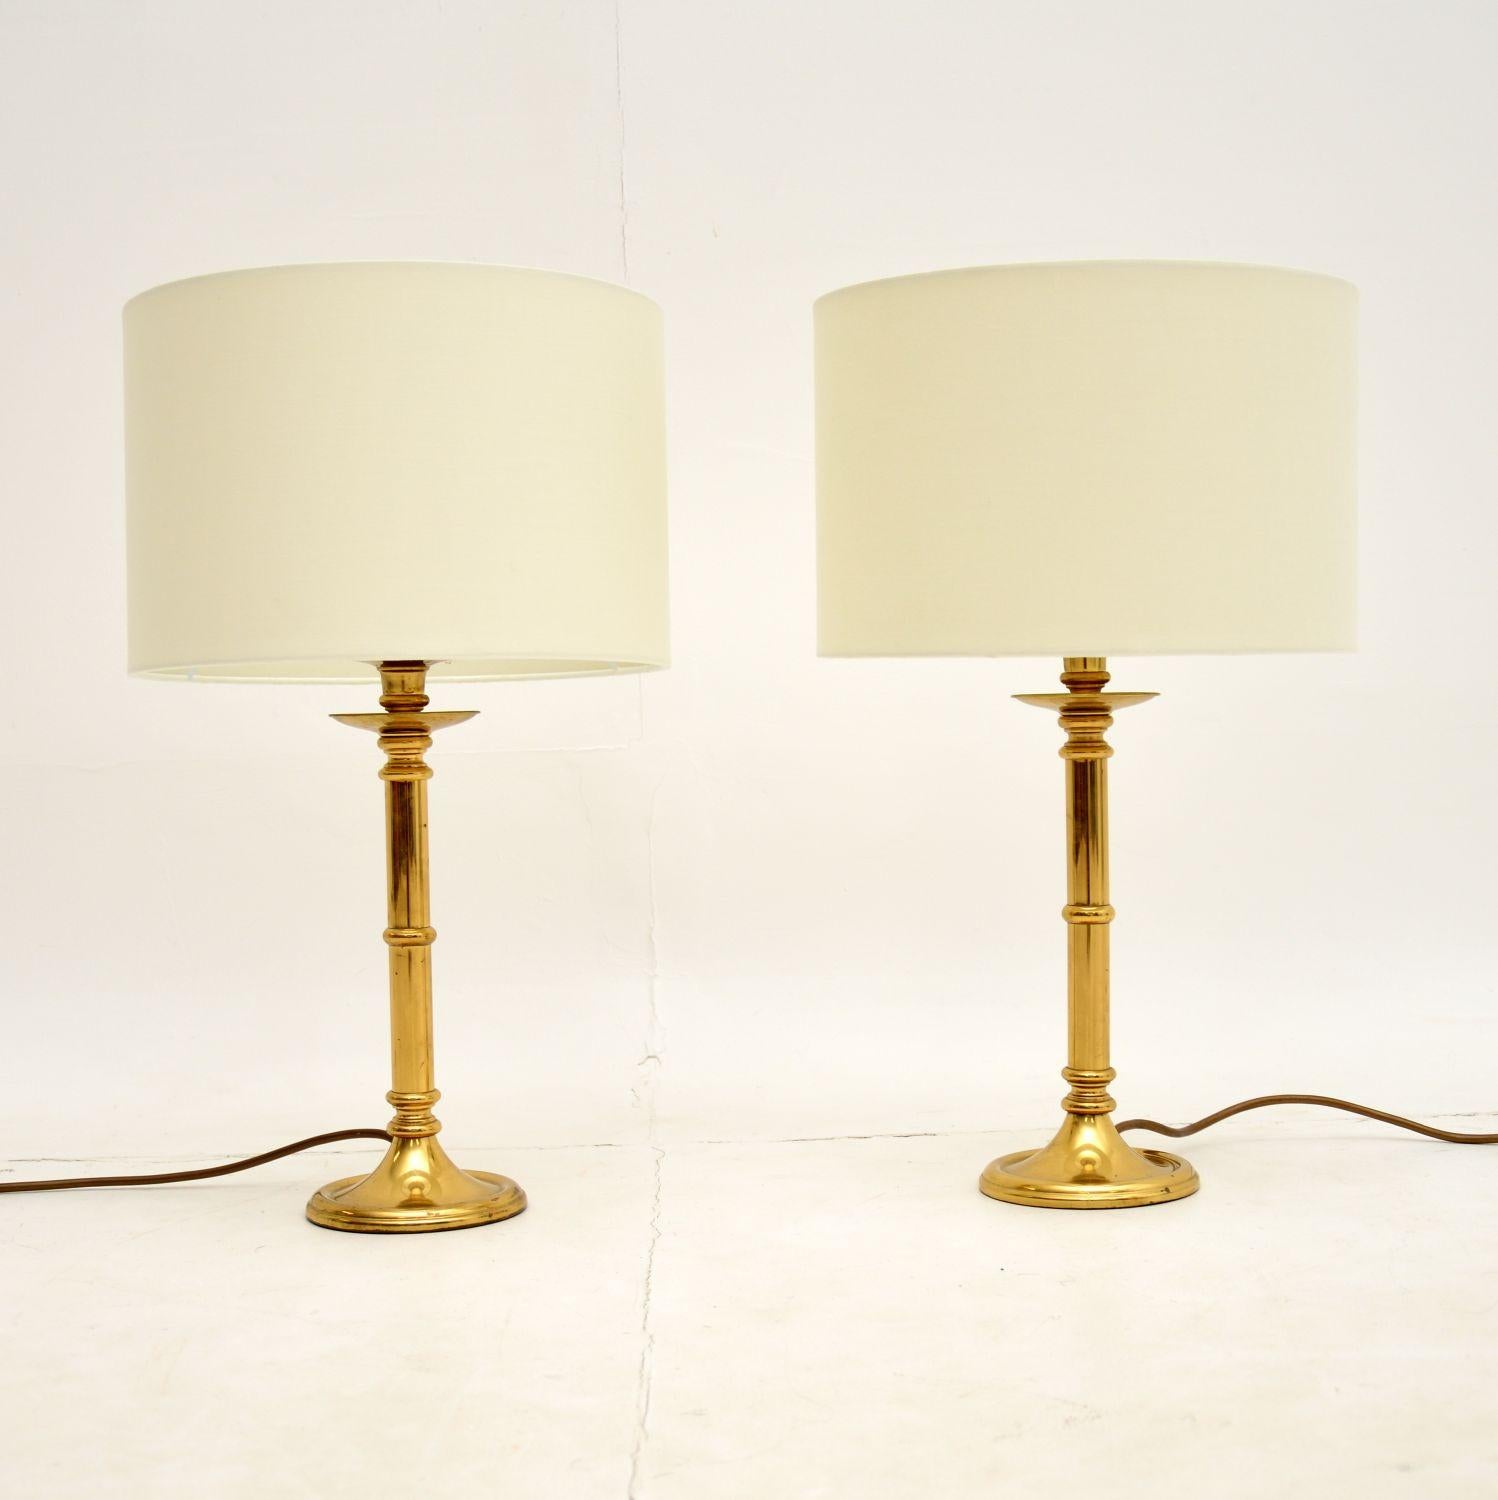 A beautiful pair of vintage solid brass table lamps, made in England and dating from around the 1970’s.

The quality is excellent, these are well made and are a lovely size. The condition is very good for their age, with just some minor surface